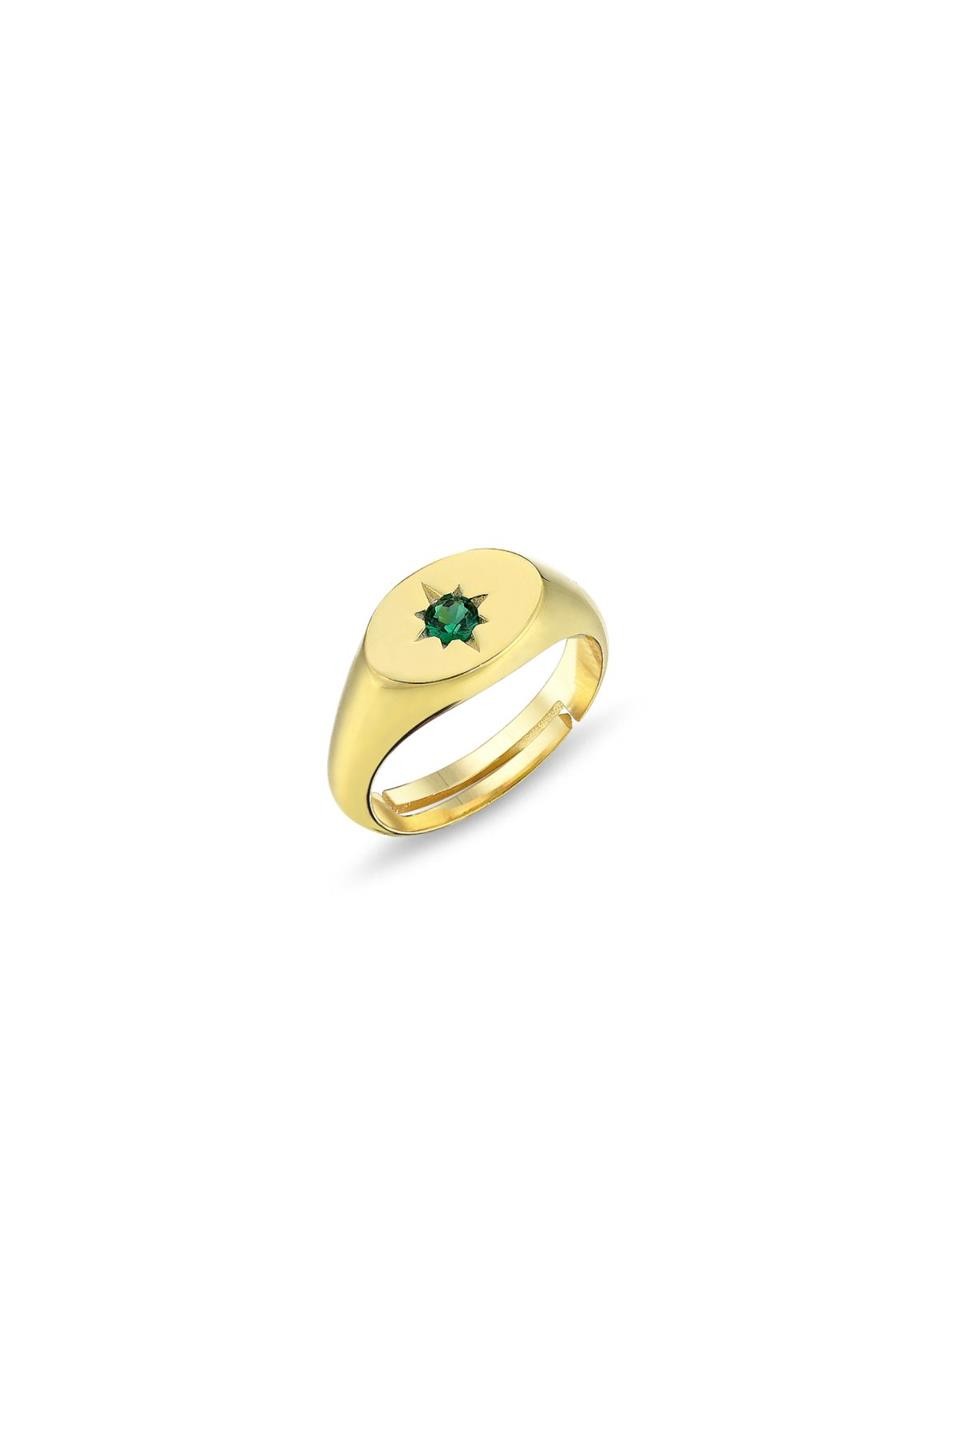 Green Zircon Gold Plated Ring